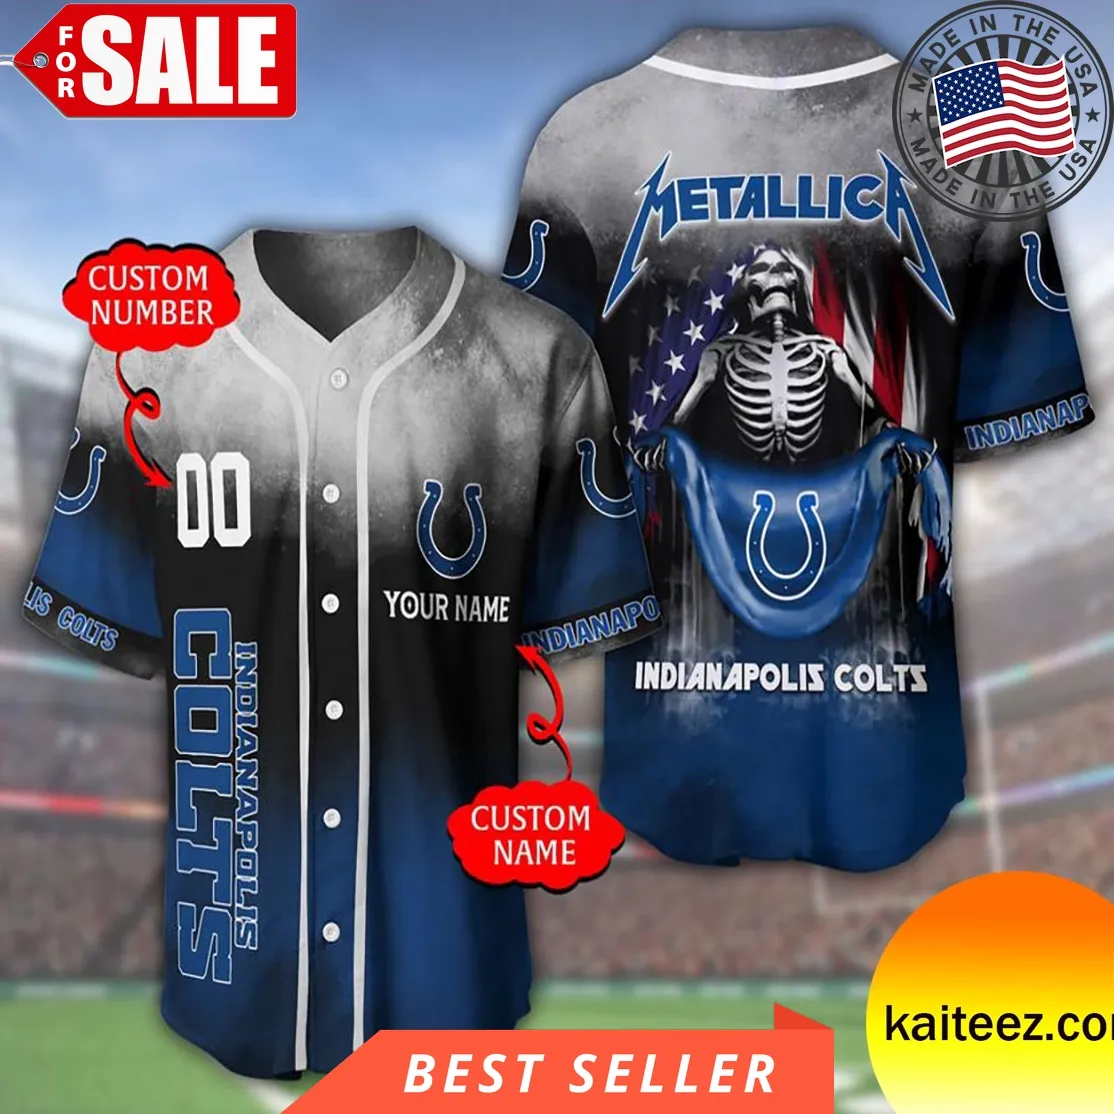 Custom Name And Number Metallica Band Indianapolis Colts Nfl Flag America Baseball Jersey Size up S to 5XL Sunflower,Baseball